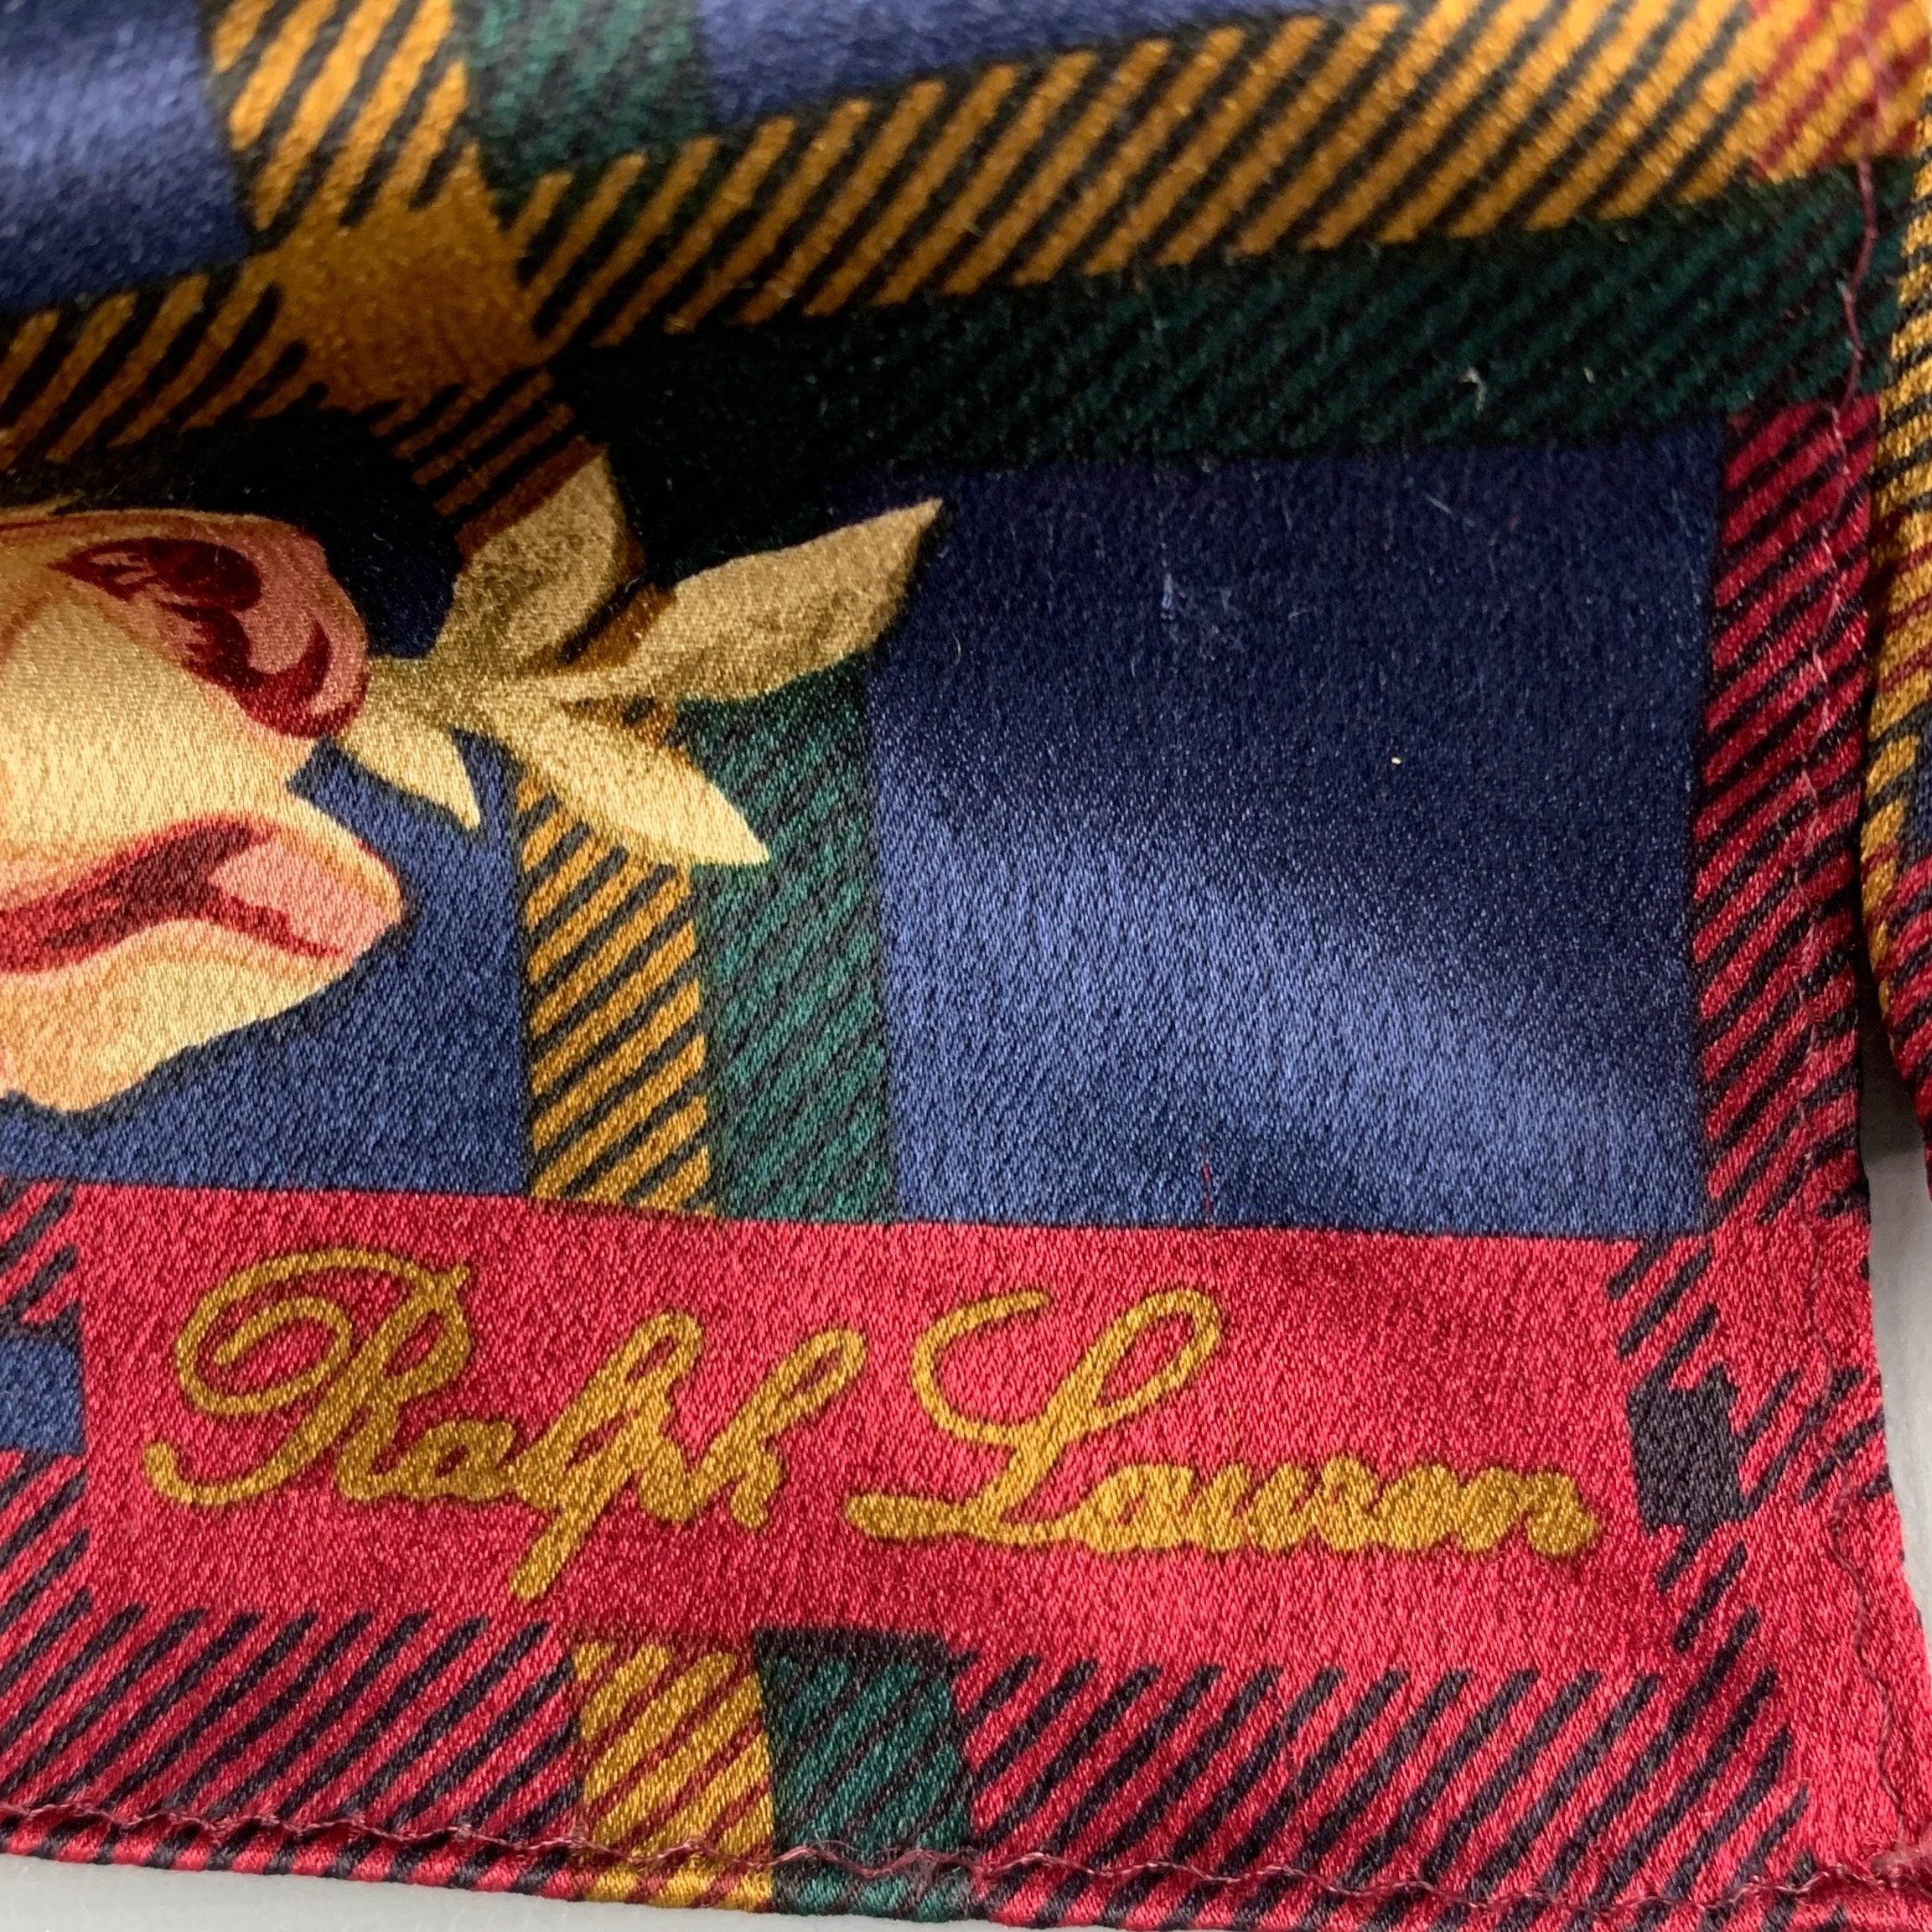 RALPH LAUREN scarf
in a
glossy burgundy fabric featuring multi-color plaid pattern with florals.Very Good Pre-Owned Condition. 

Measurements: 
  68 inches  x 14 inches 
  
  
 
Reference No.: 128364
Category: Scarves & Shawls
More Details
   